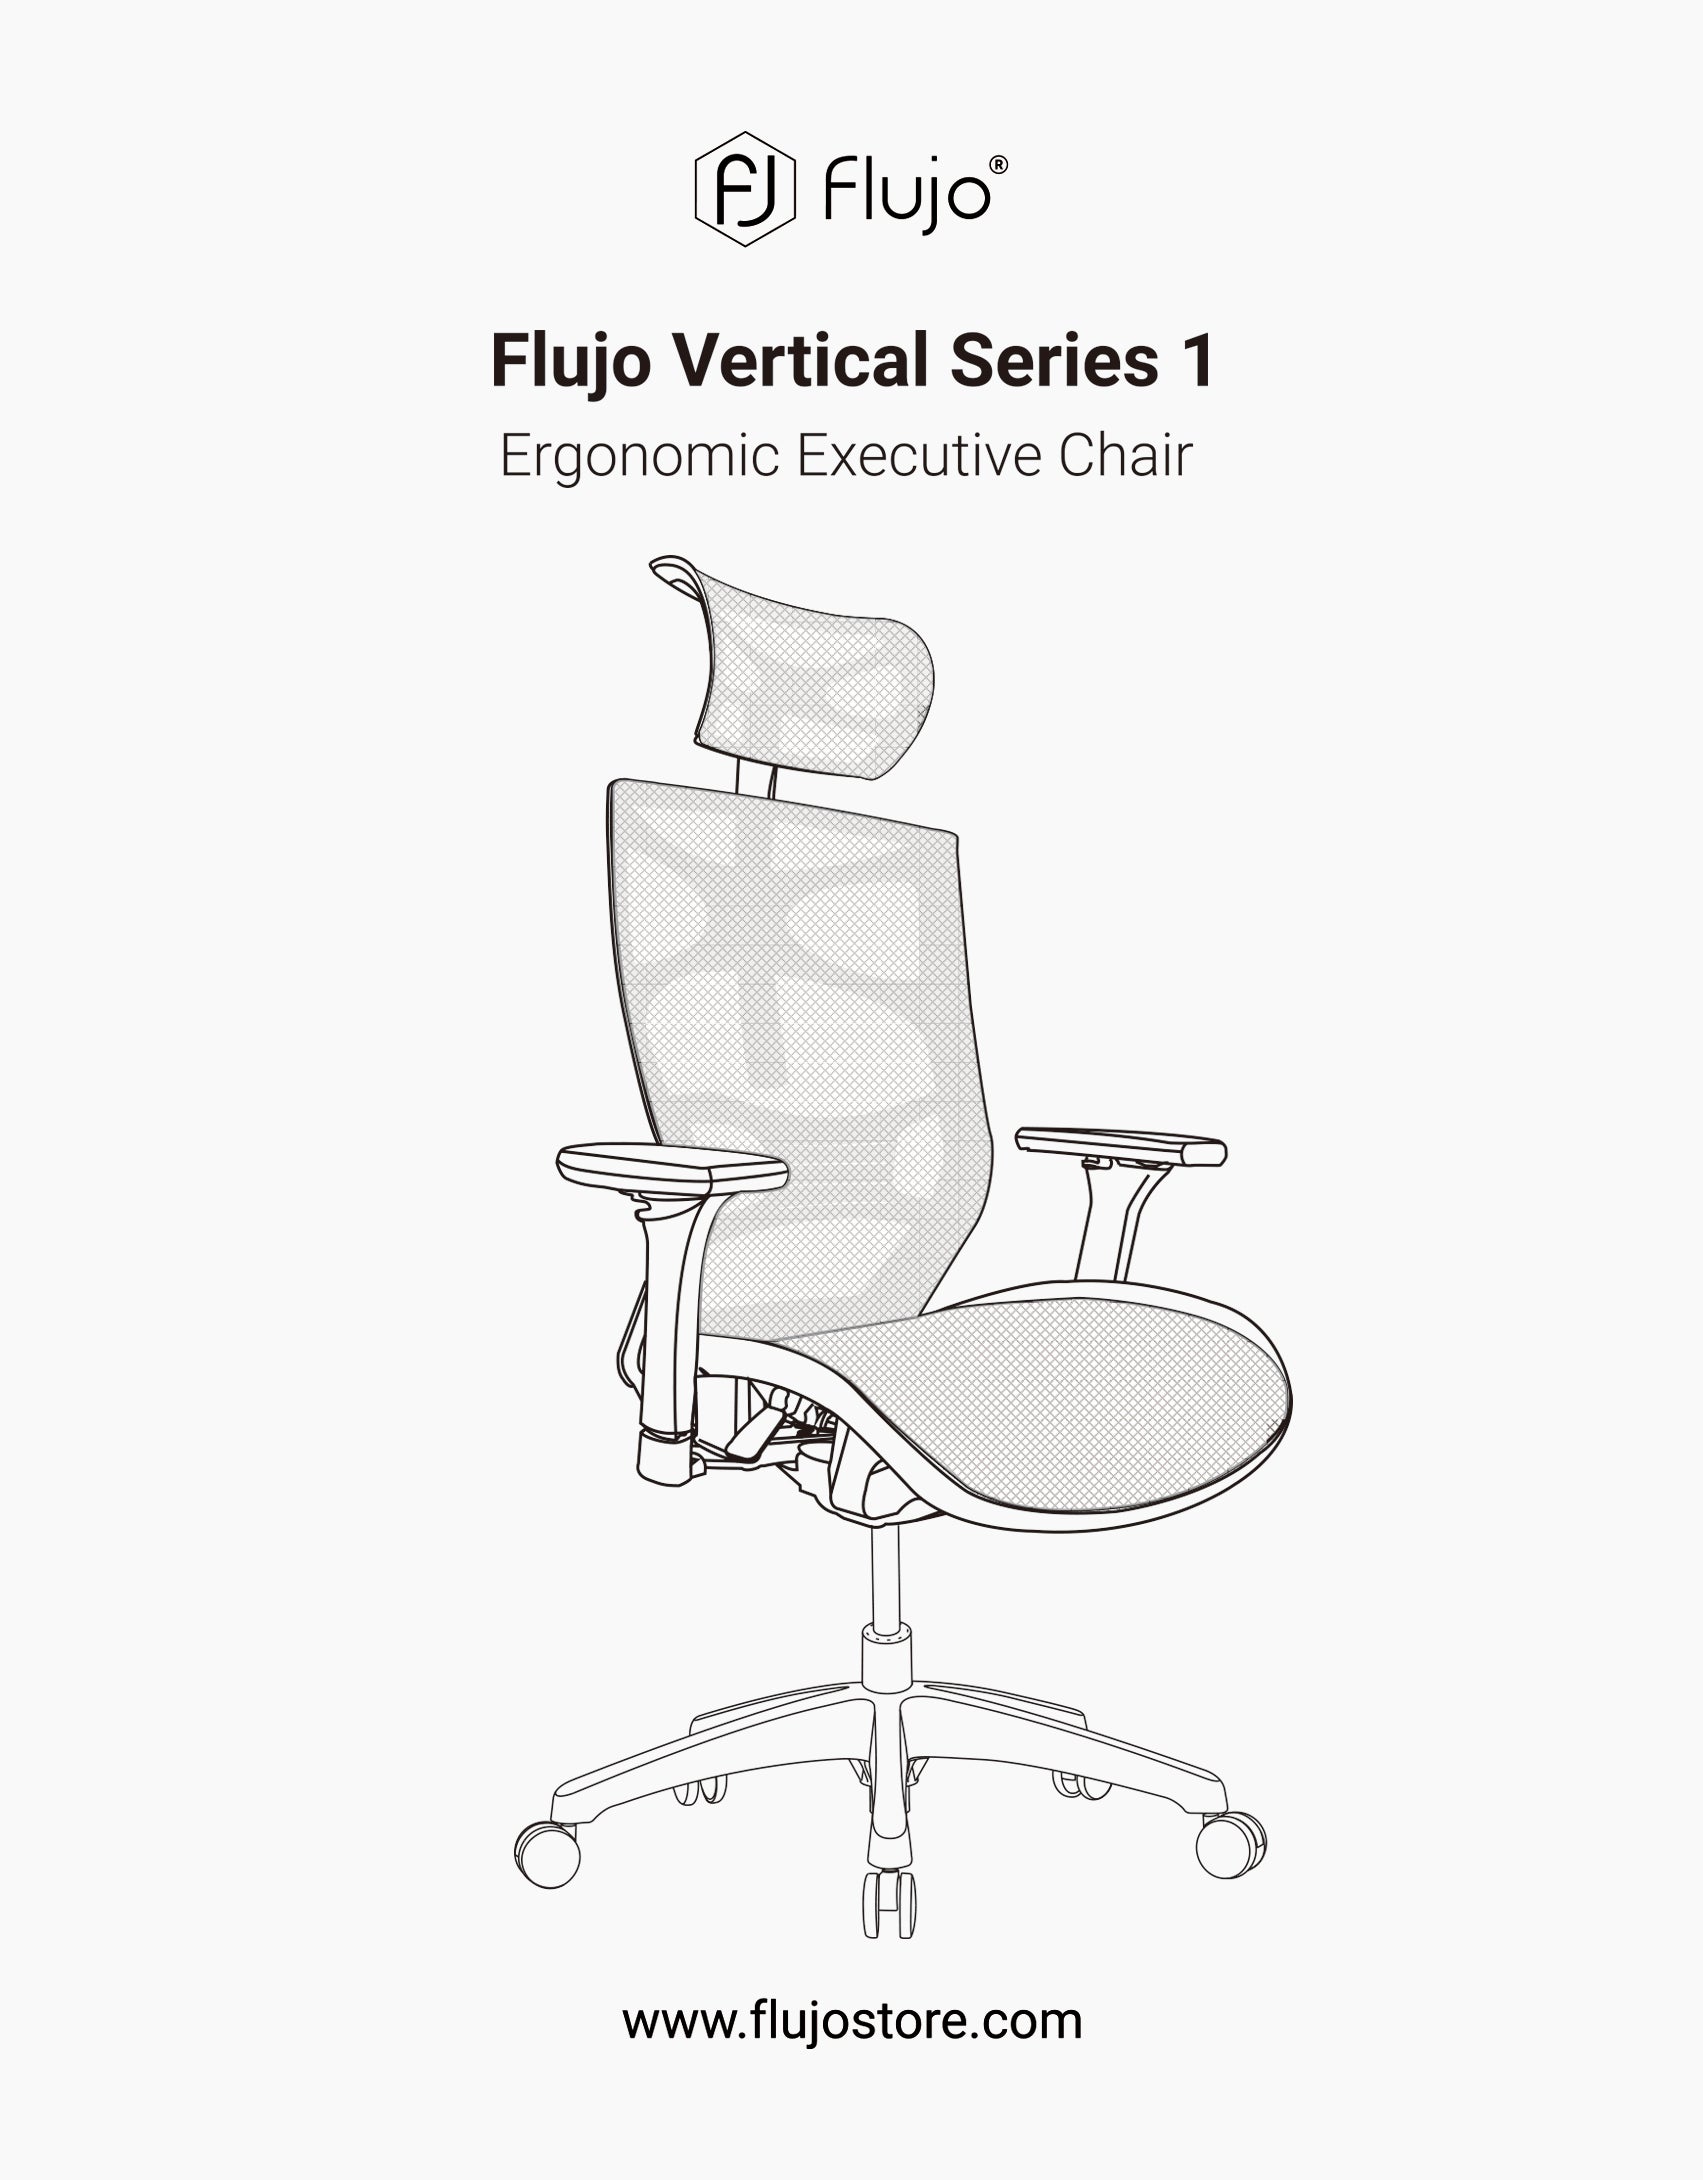 Sketch of the Flujo Vertical Series 1 Ergonomic Executive Chair, featuring a tall mesh back for breathable support, as seen on the Flujo store online.